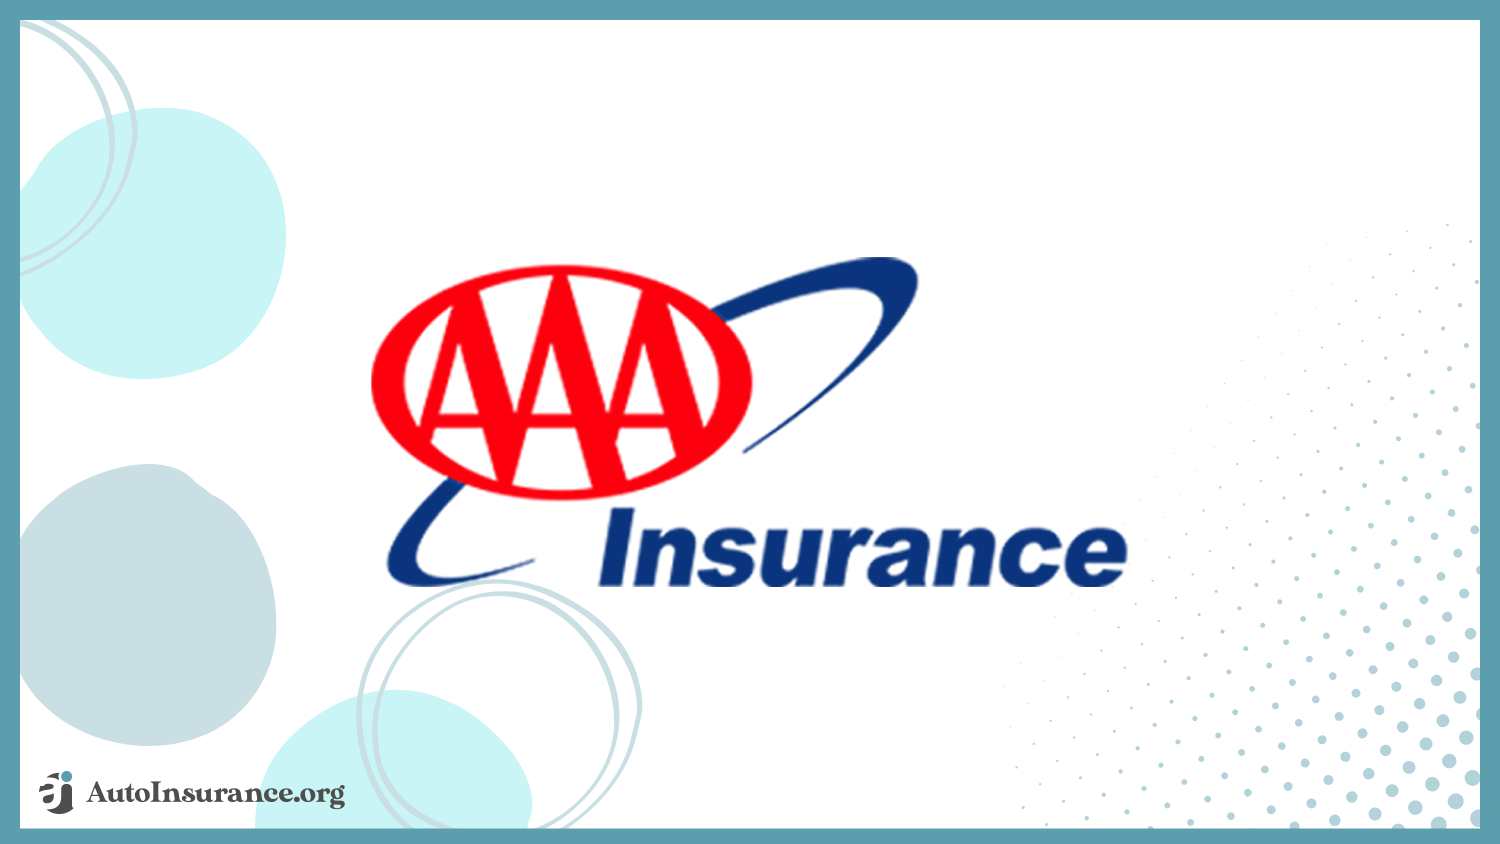 AAA Insurance: Best Cheap Auto Insurance With No Down Payment for Competitive Rates